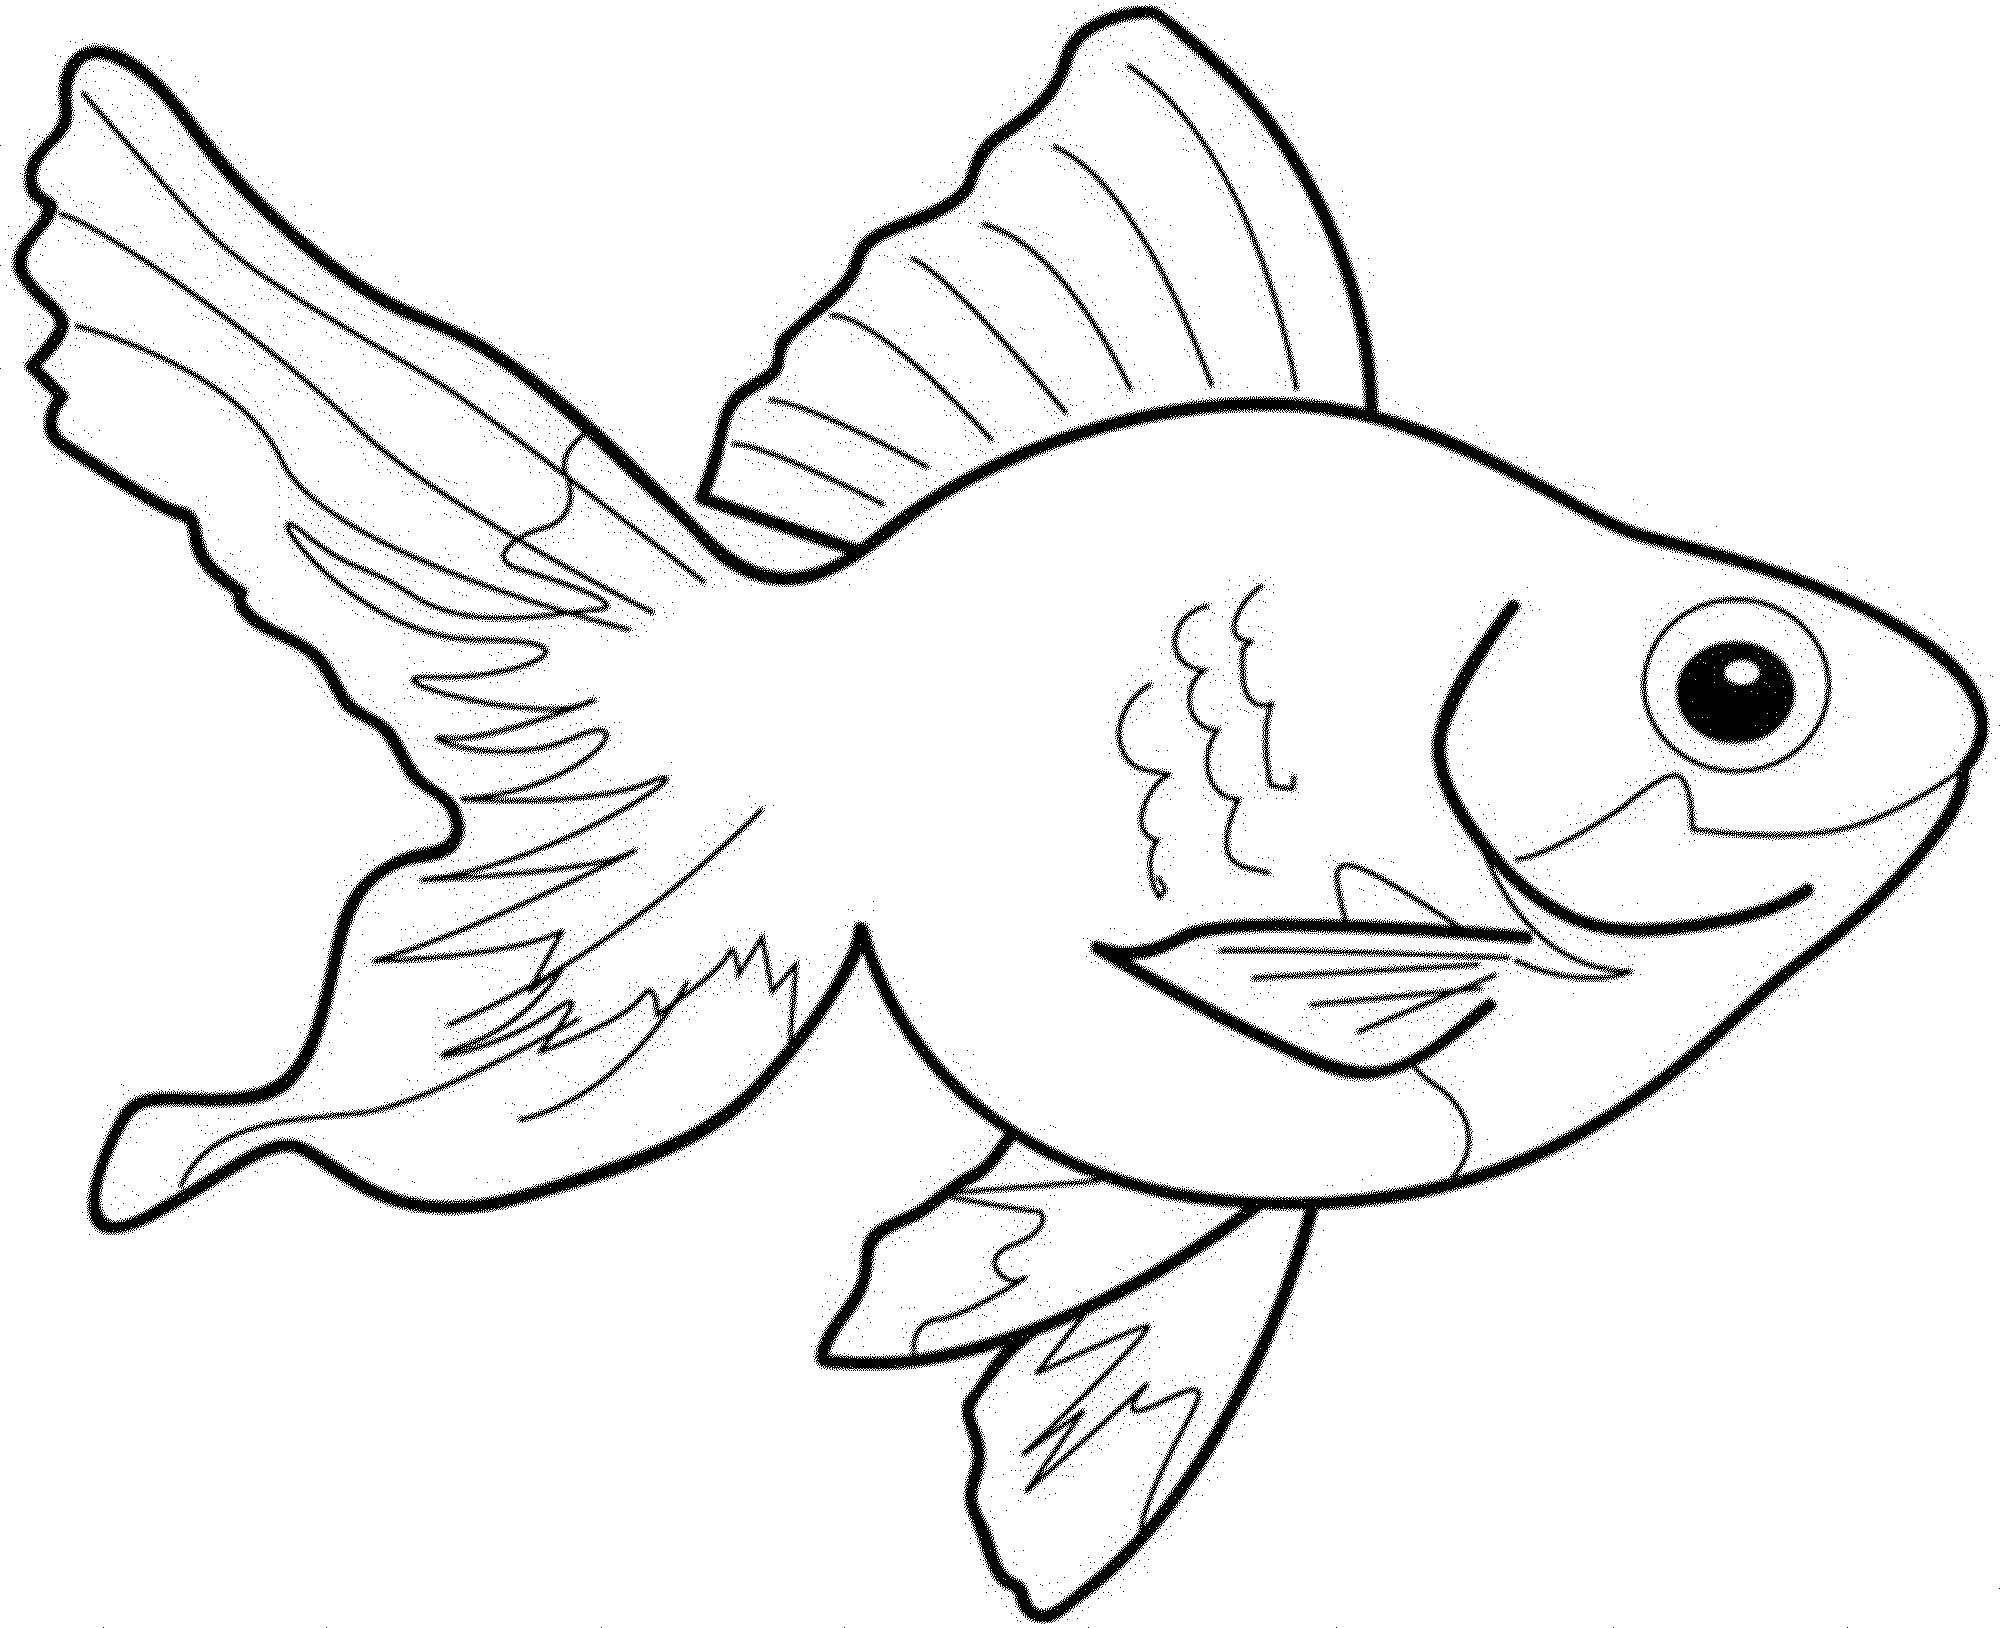 Print & Download   Cute and Educative Fish Coloring Pages